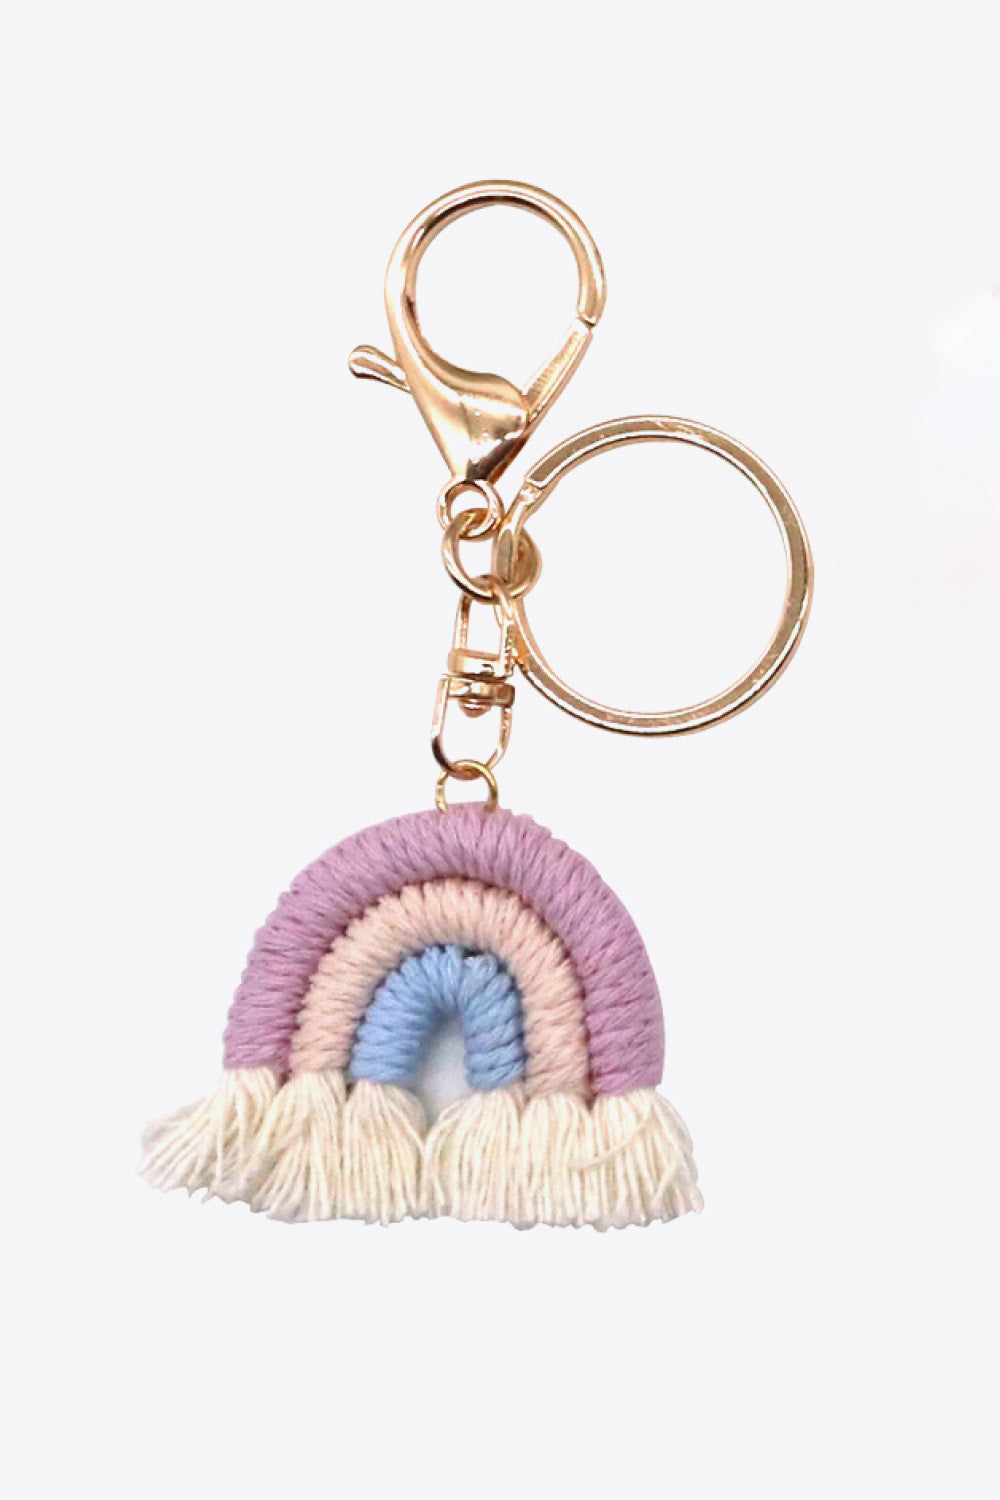 Trendsi Cupid Beauty Supplies Lilac/Eggshell/Blue / One Size Keychains Assorted 4-Pack Rainbow Fringe Keychain